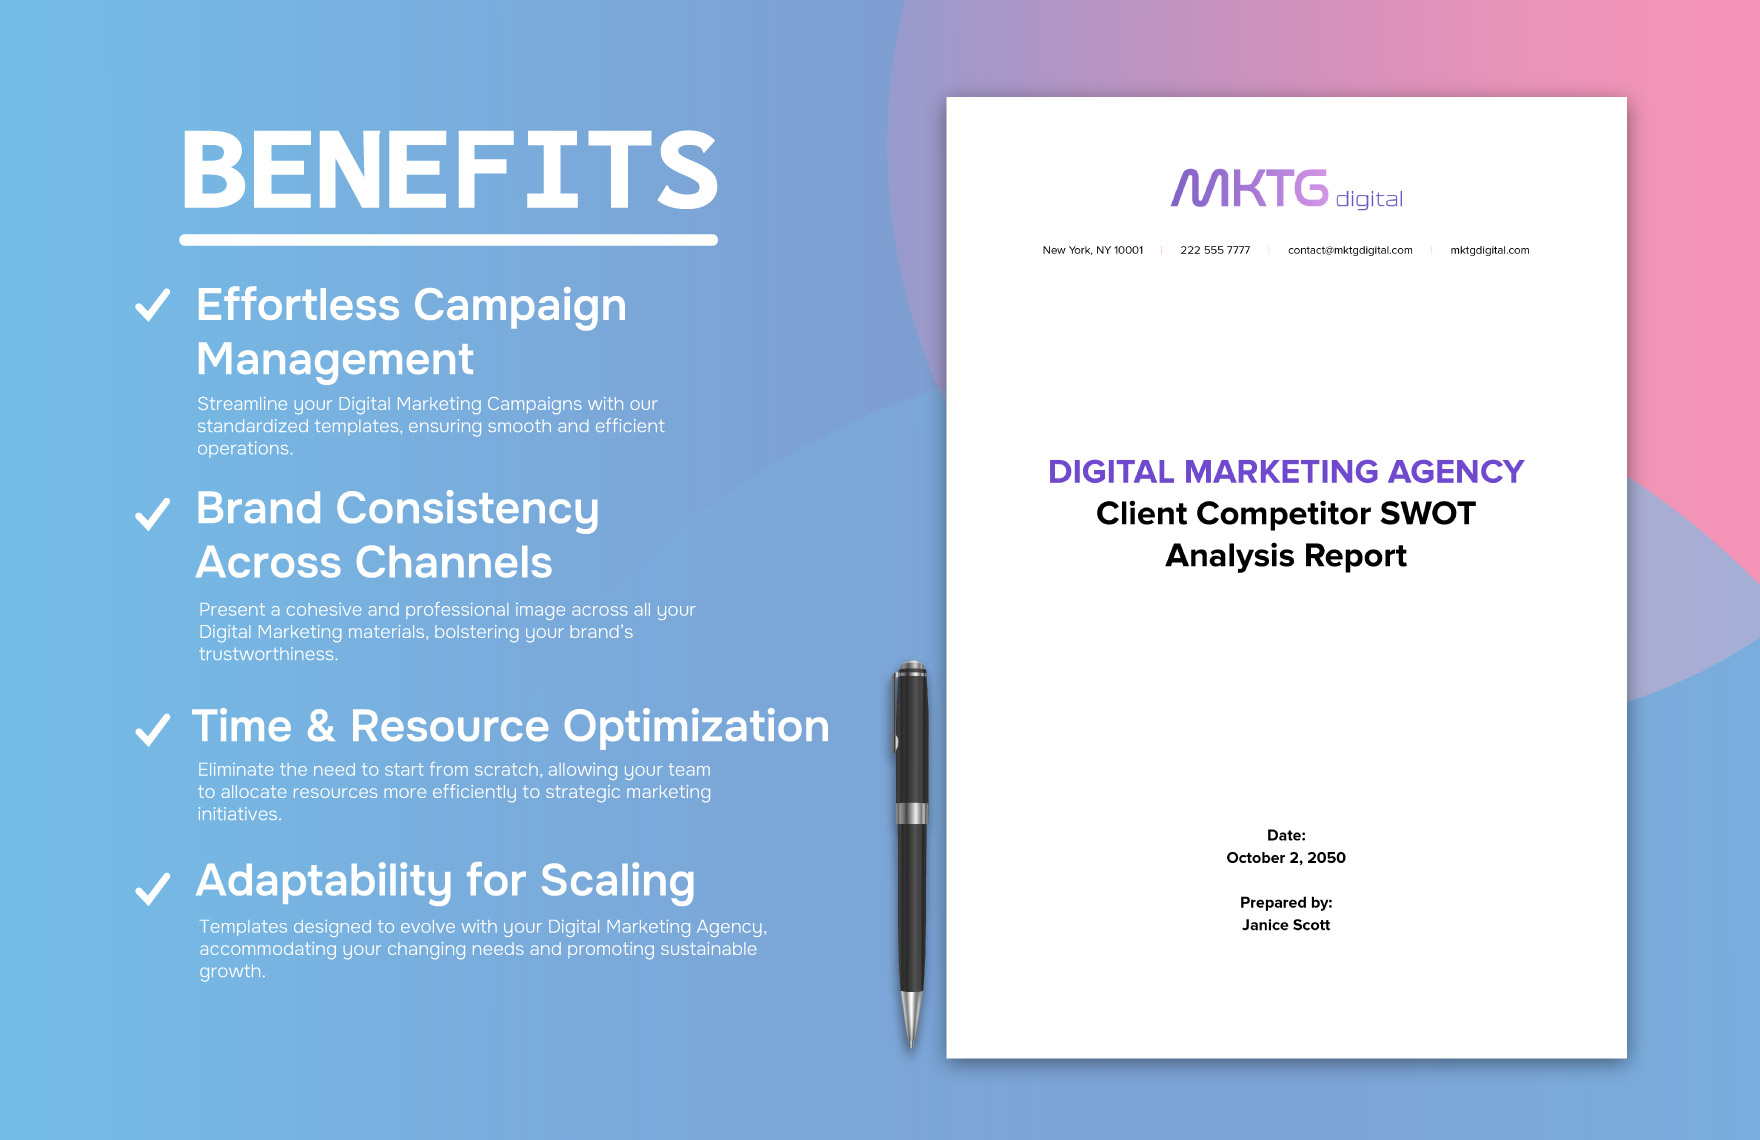 Digital Marketing Agency Client Competitor SWOT Analysis Report Template